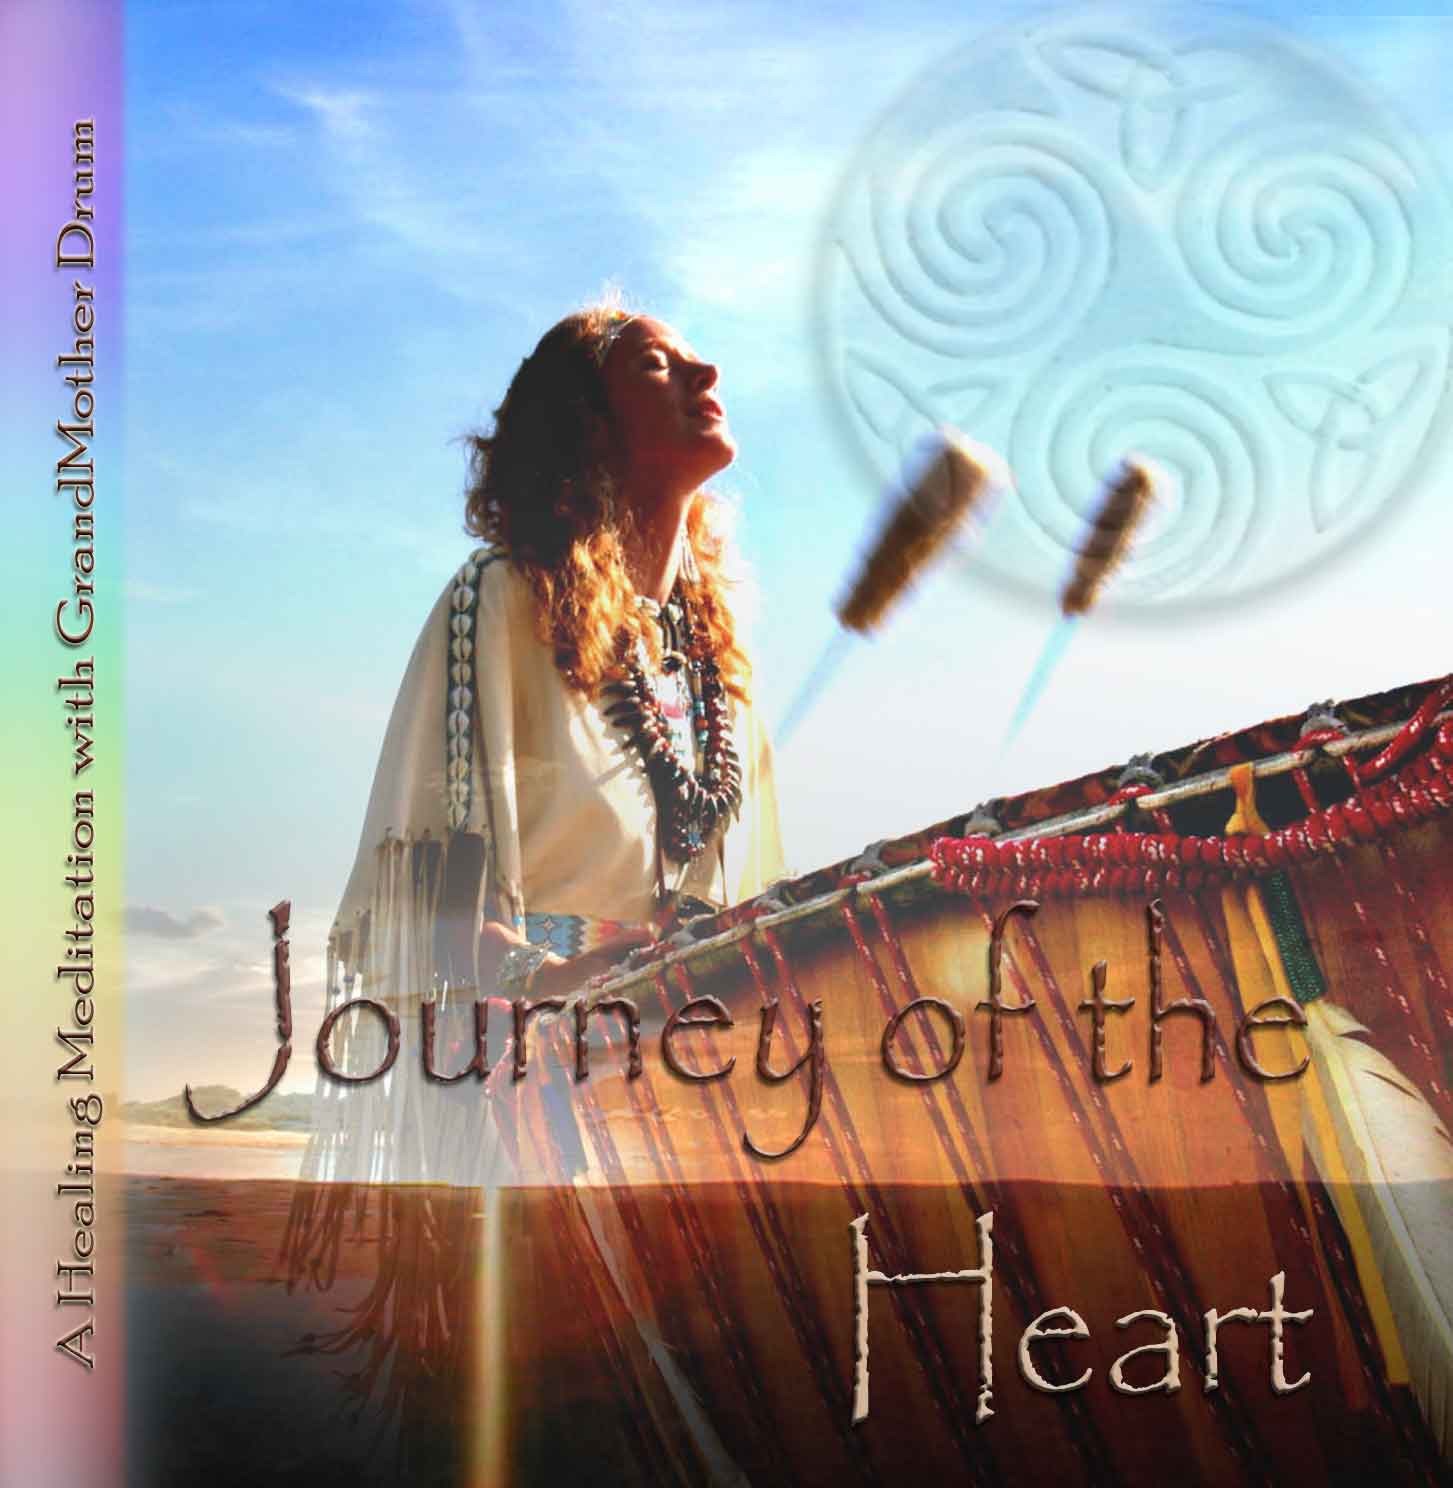 Journey of the Heart - Digital MP3 • The Whirling Rainbow Foundation